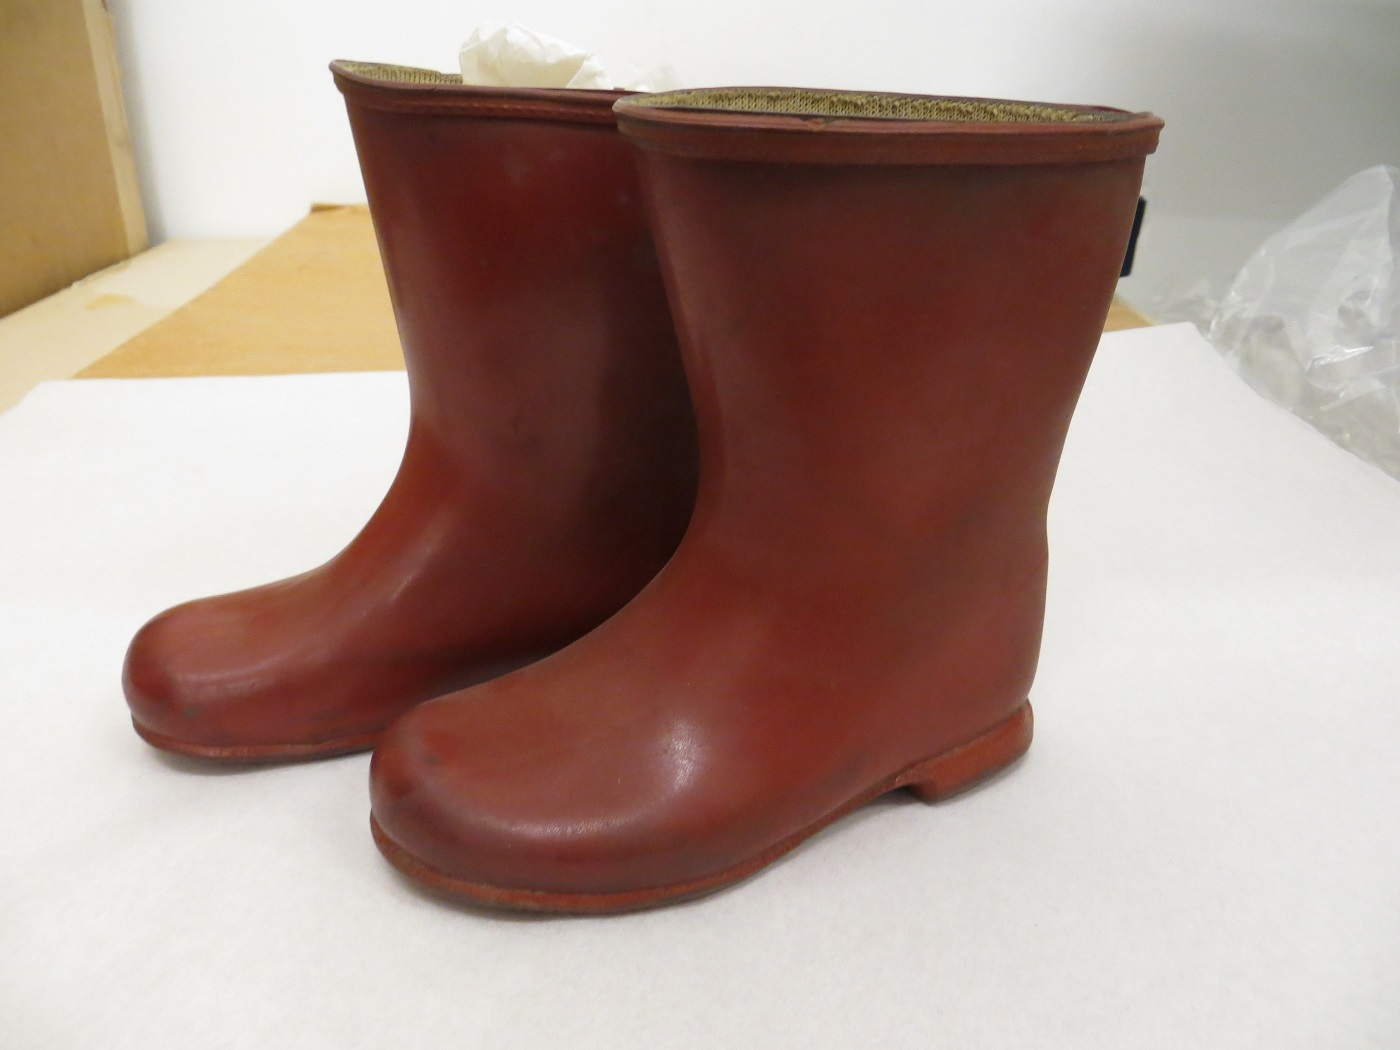 MISC.215:1-1988; Red rubber wellington boots; Dunlop, ca. 1959. Held by the Museum of Childhood © Victoria and Albert Museum, London